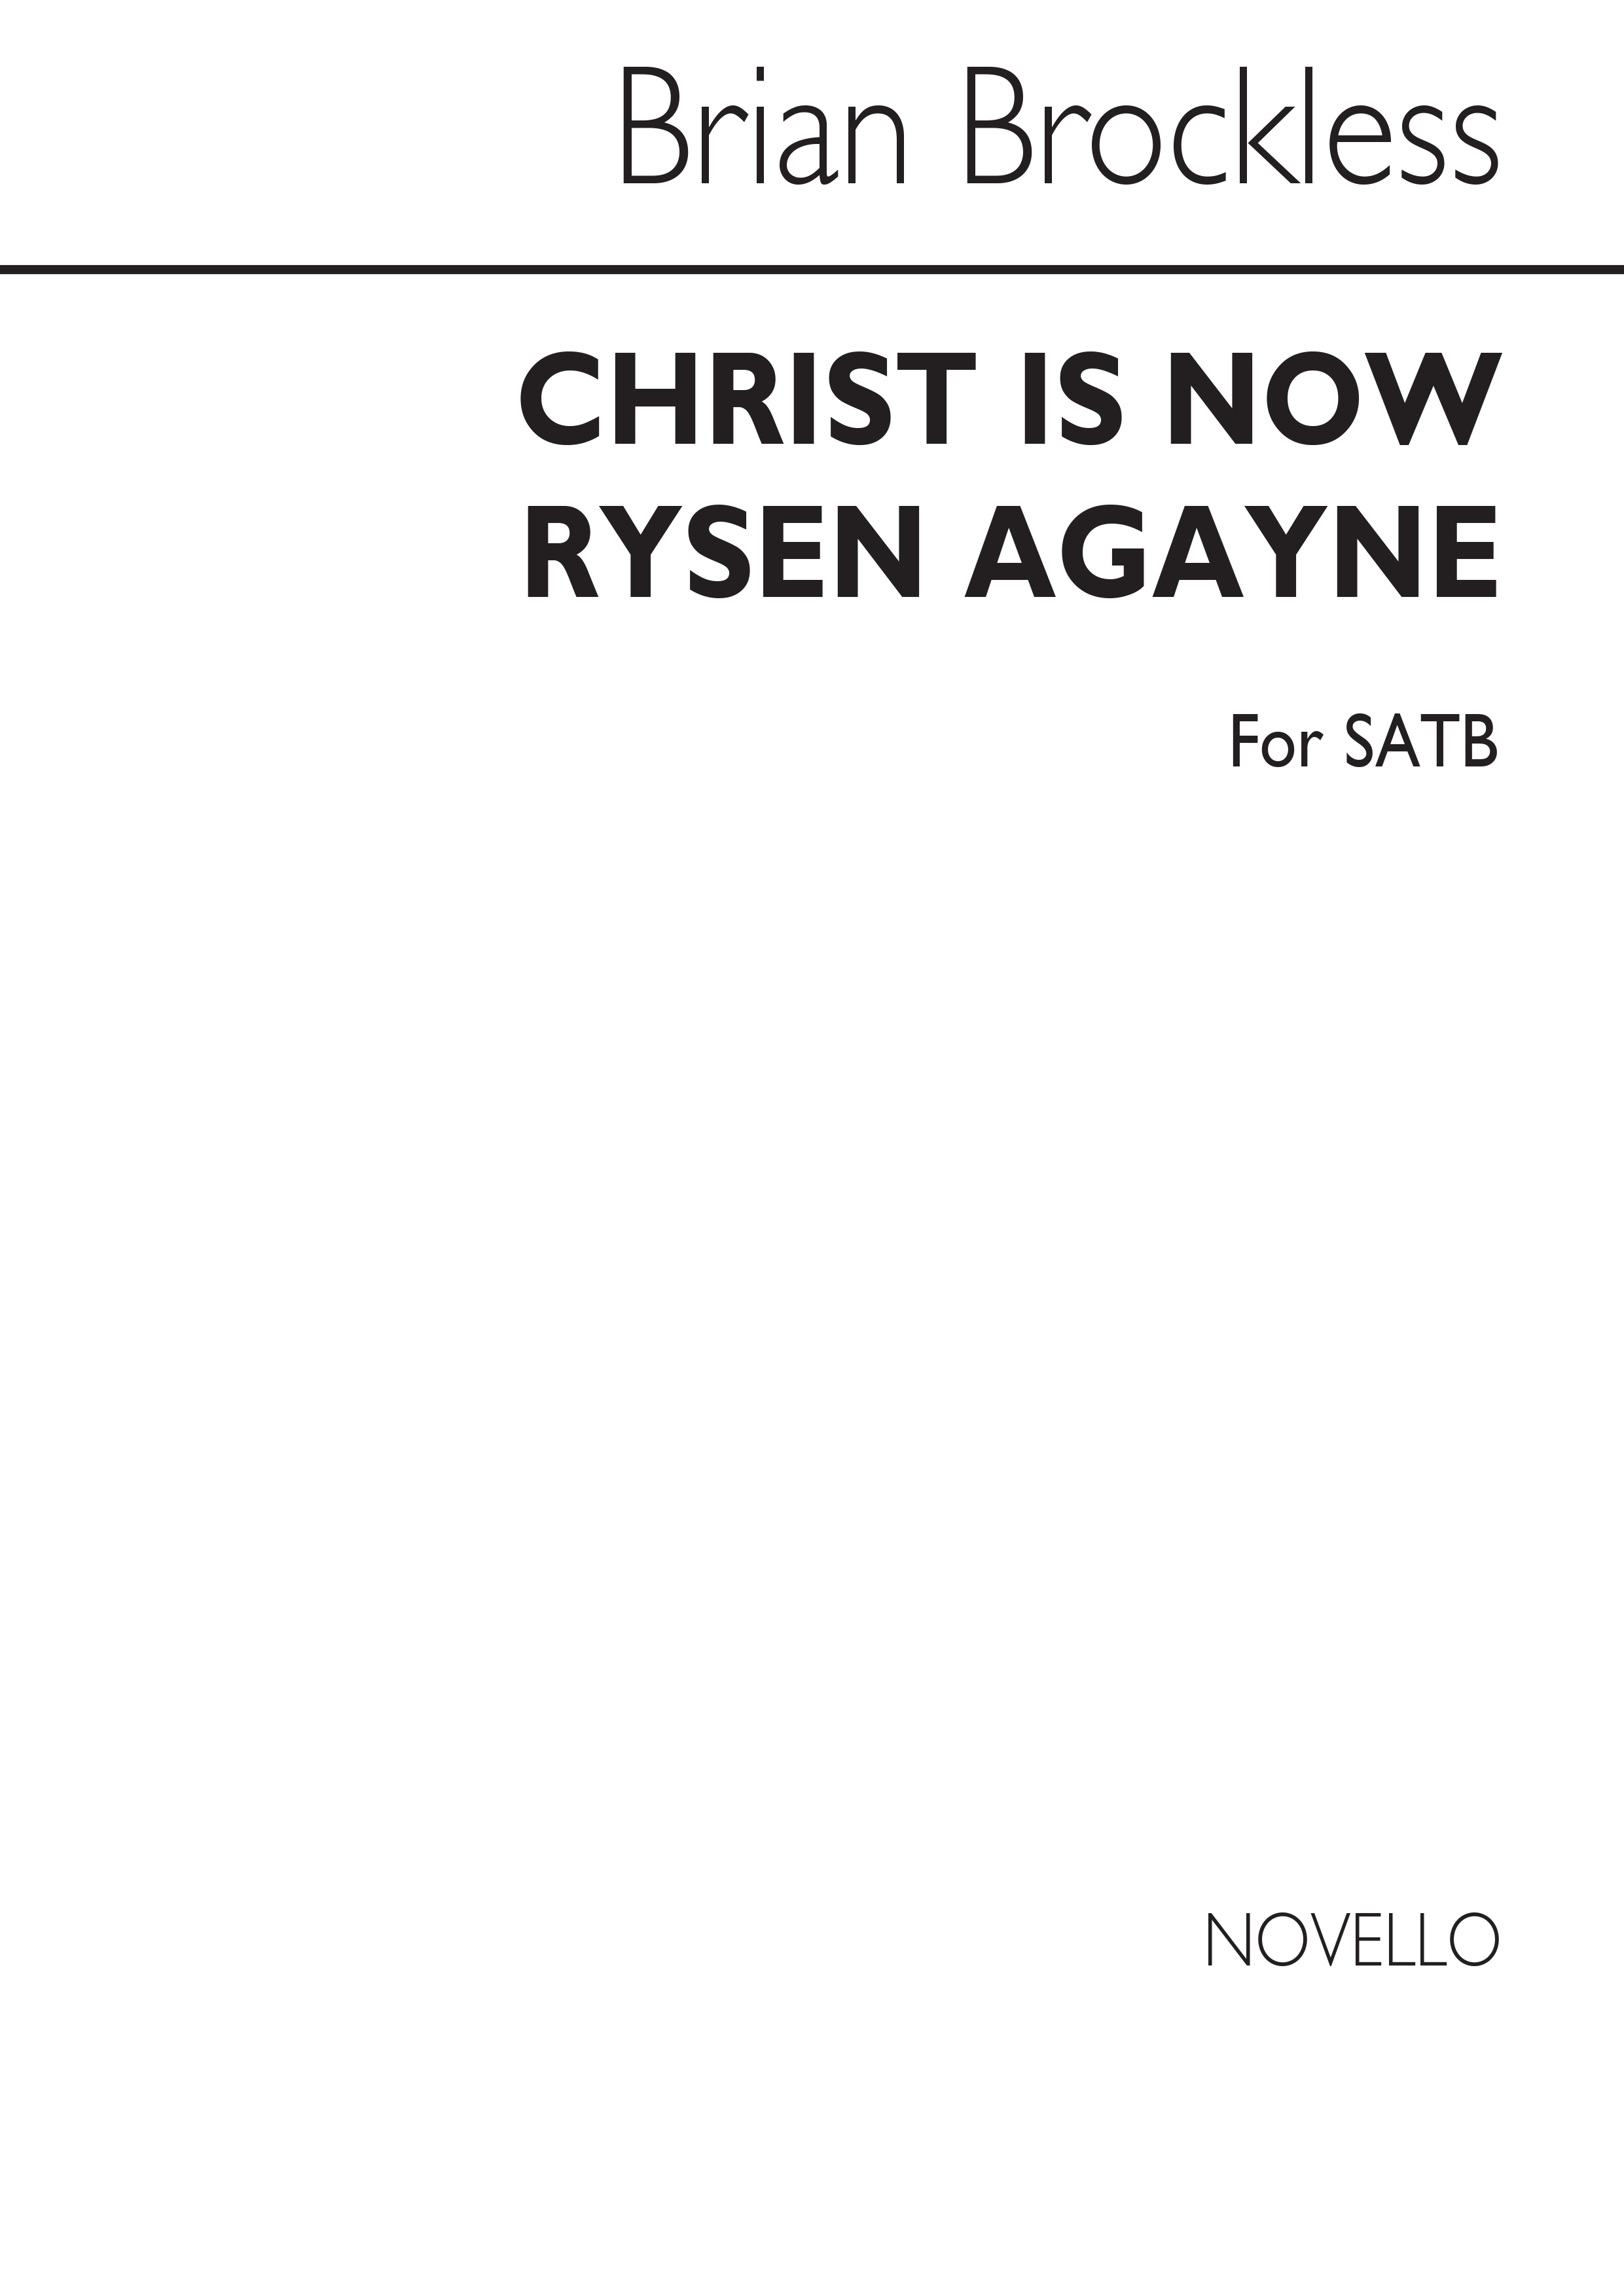 Brockless Christ Is Now Rysen Satb